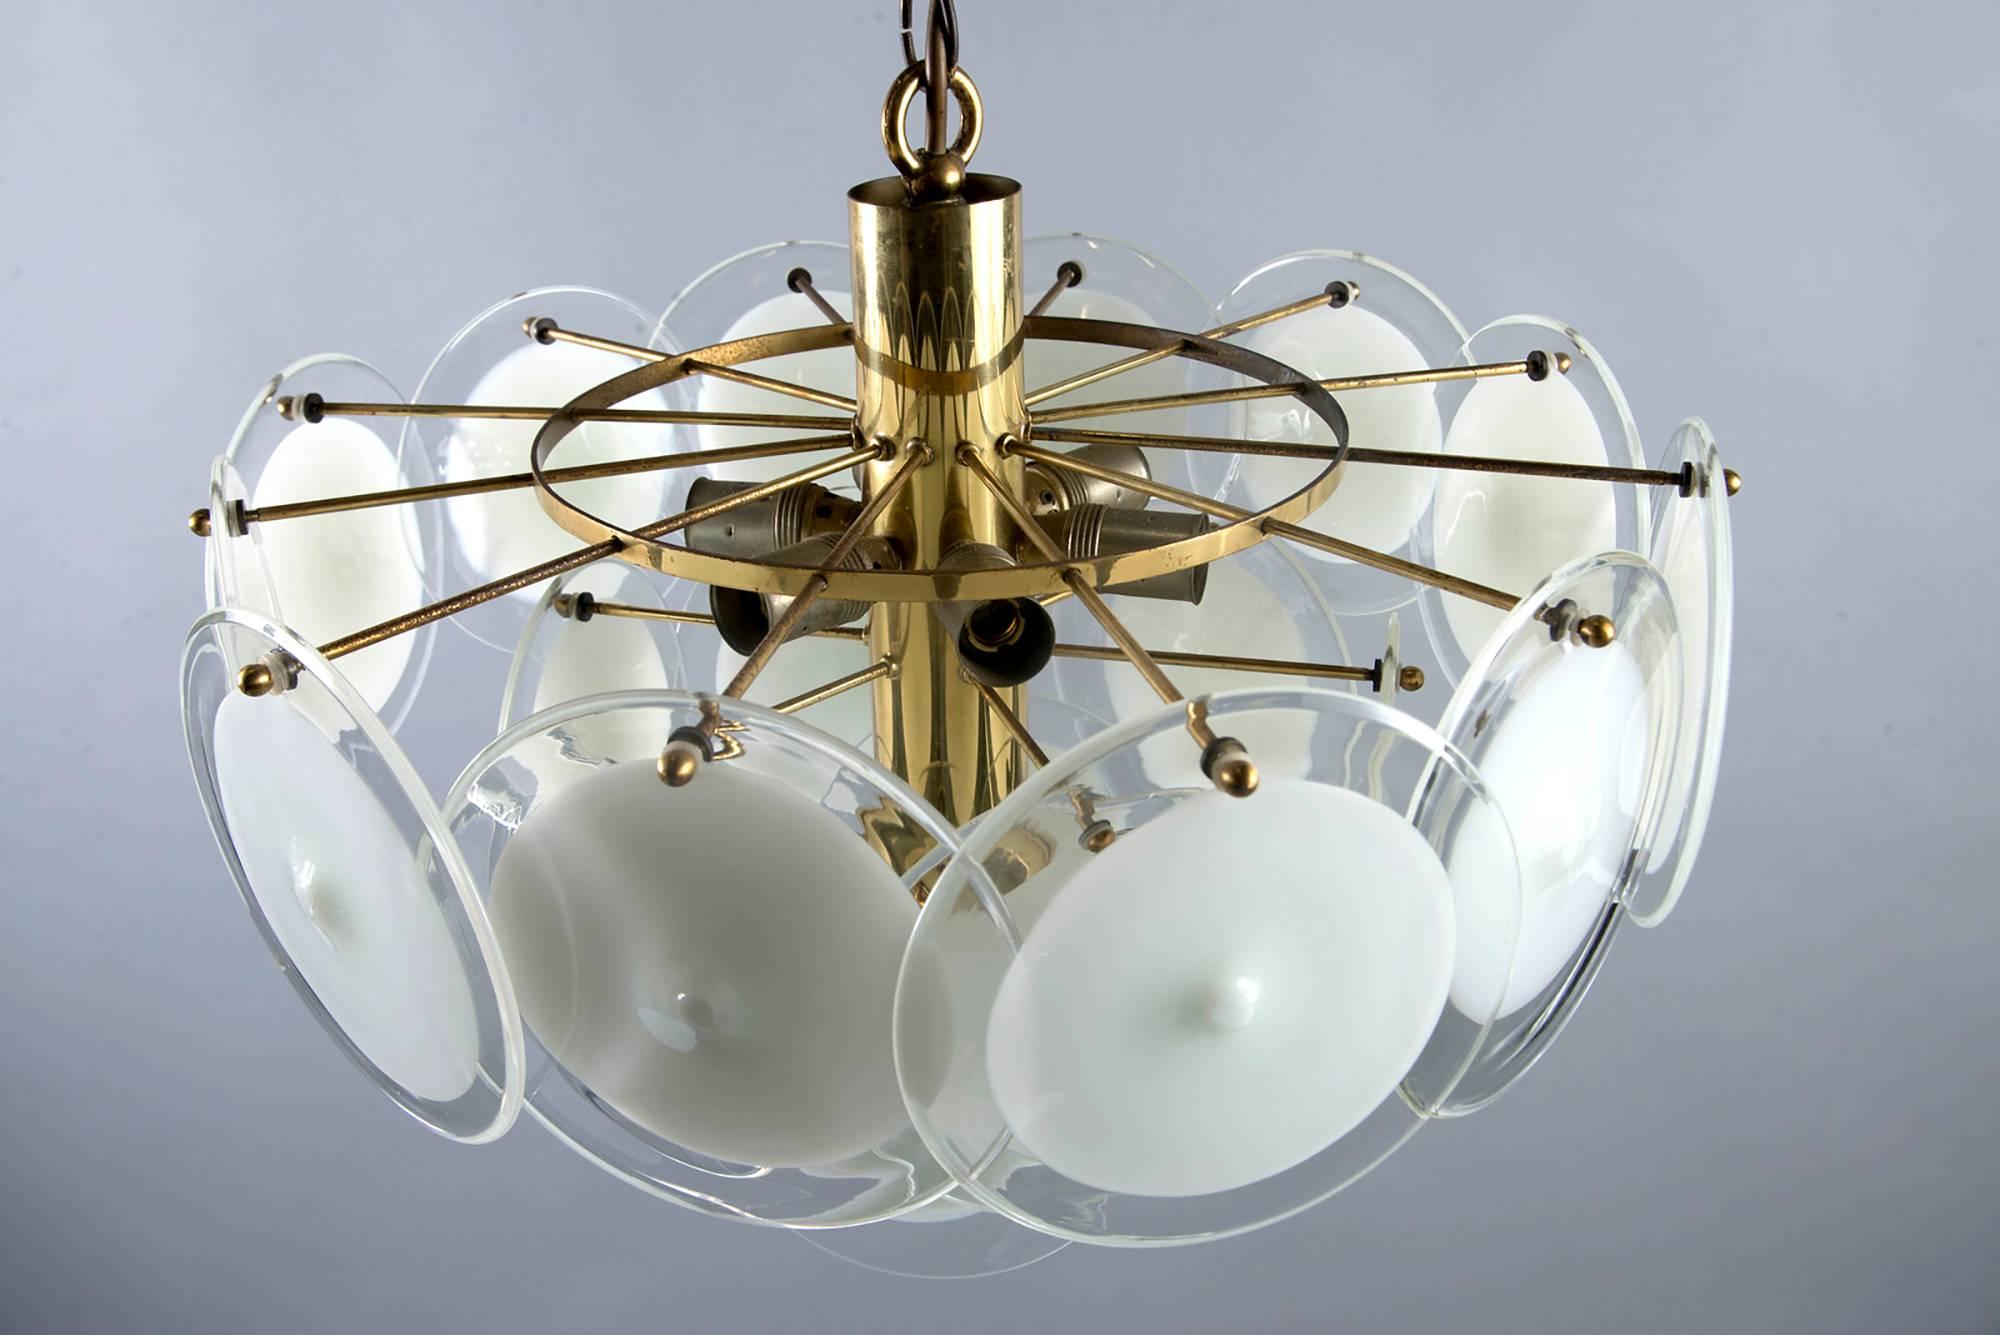 Murano glass chandelier manufactured by Vistosi features a brass-plated metal base with three tiers of suspended glass disks, circa 1960s. Round glass elements are opaque white at the center with clear edges. Chandelier has been rewired for US